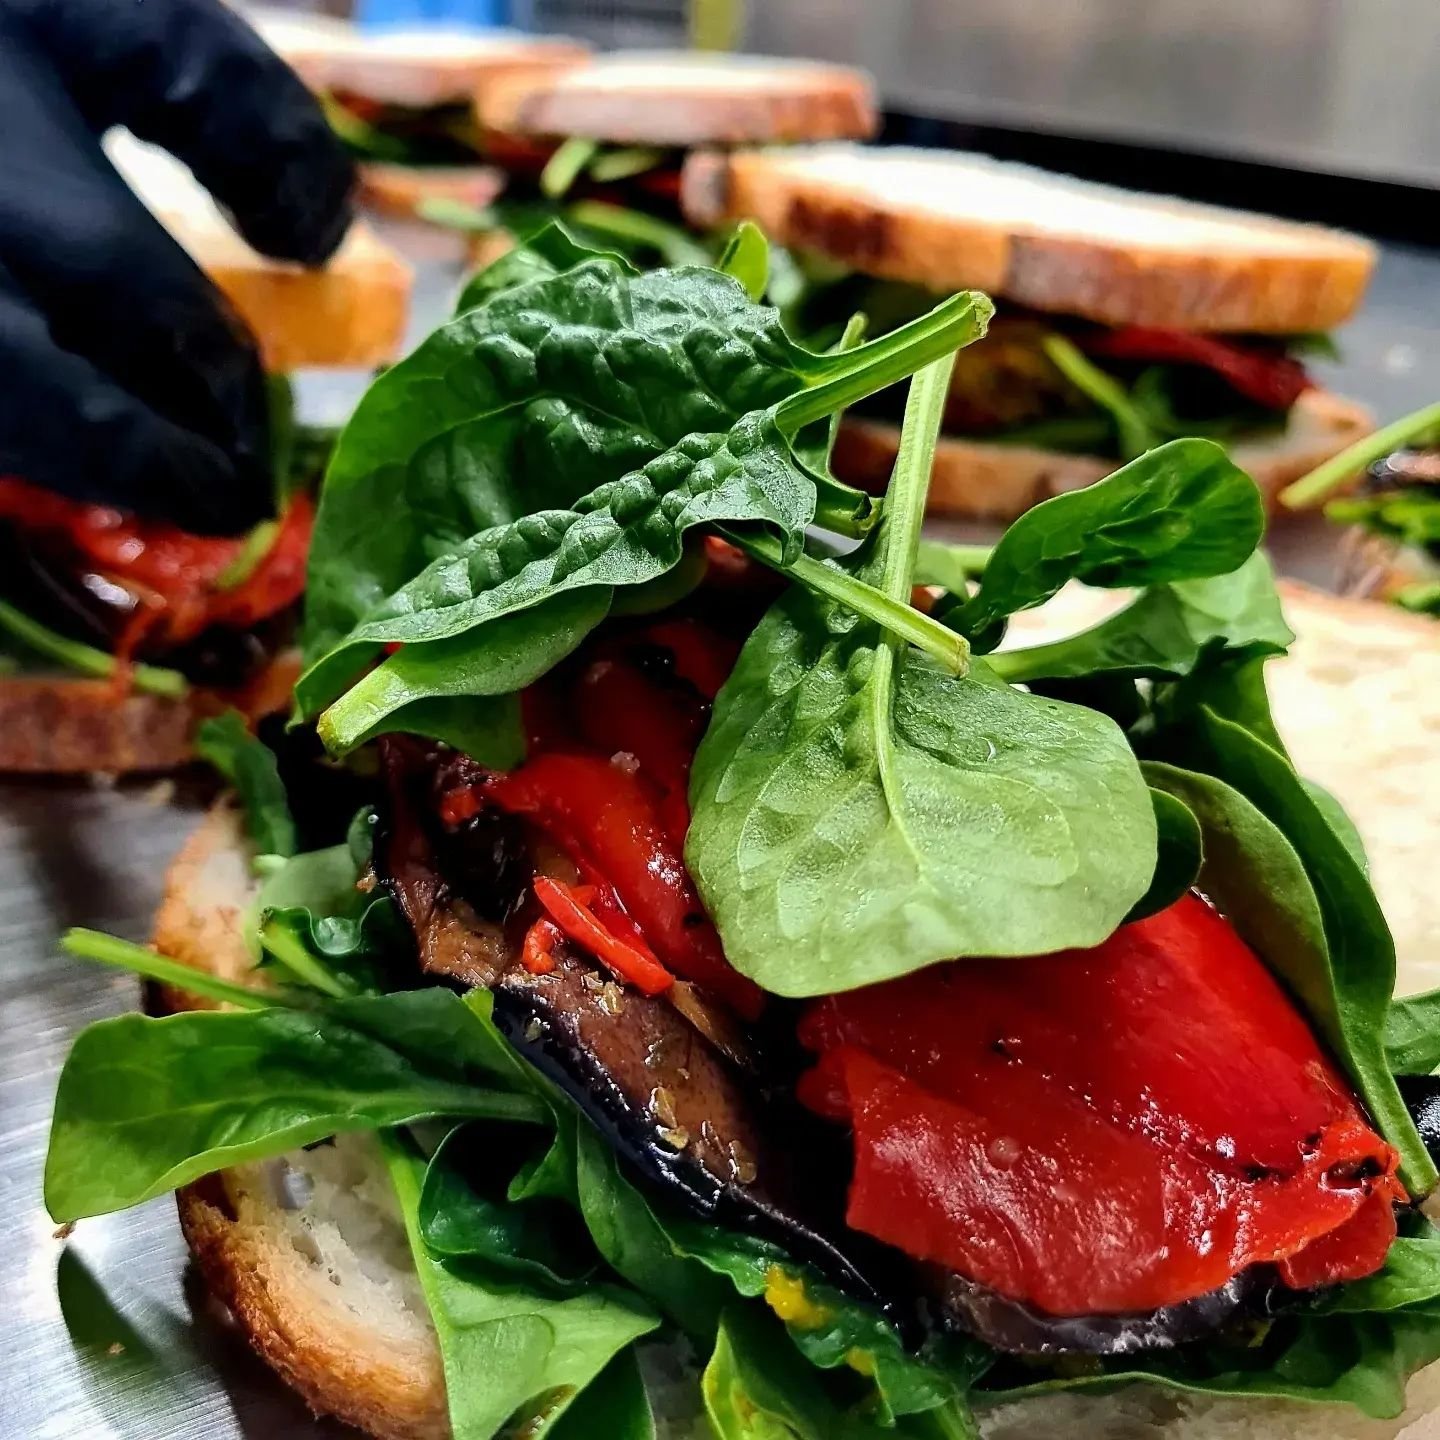 Our fully loaded Toasted Roasted Vegetarian Sandwich! Eggplant, pumpkin,  capsicum, baby spinach, nut free pesto, vegan aoili, all toasted on house-made sourdough bread (gluten-free option available). 

#vegetariansandwich #toastie #toastedsandwich #